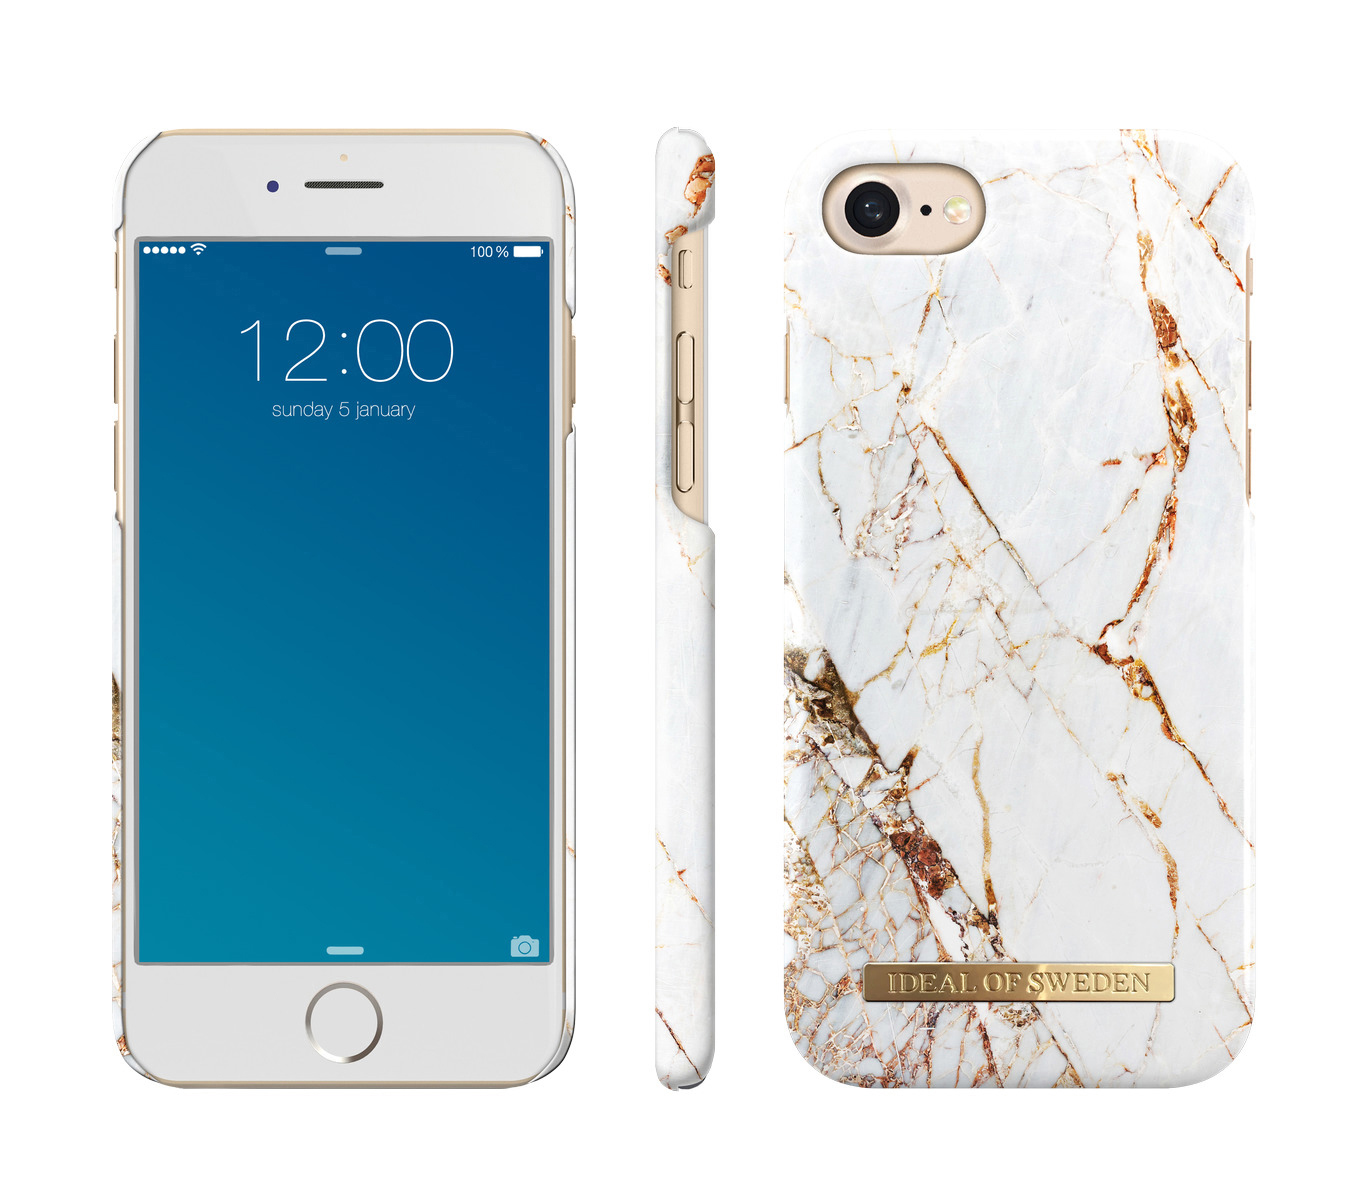 IDEAL OF Carrara Gold 6, 7, iPhone SWEDEN 8, Apple, iPhone Fashion, iPhone Backcover